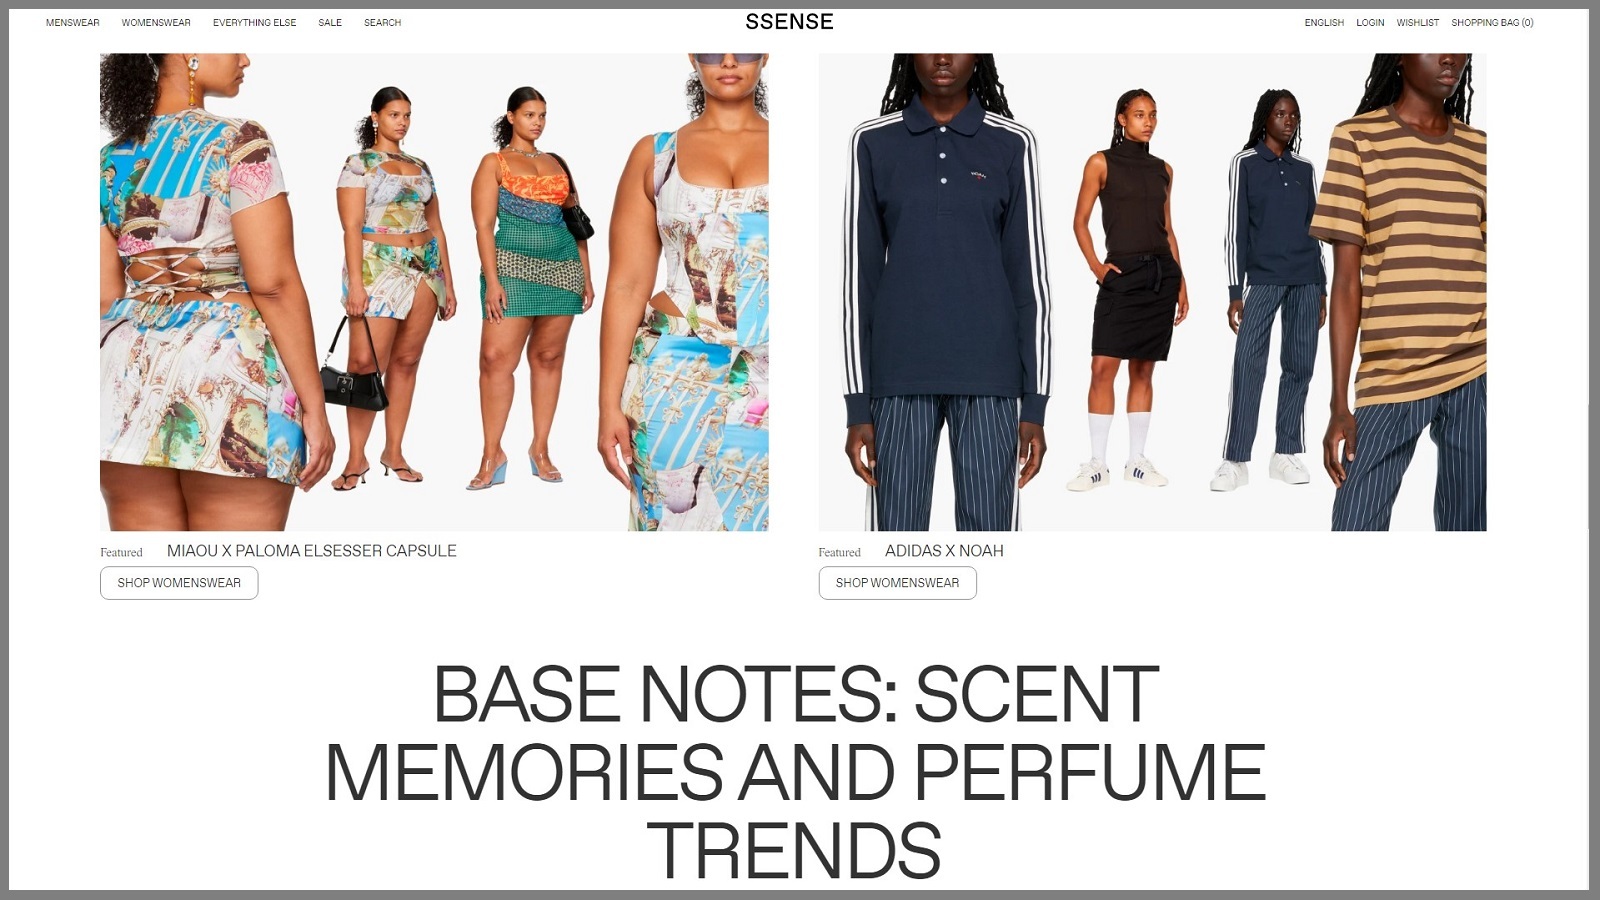 SSENSE Clothing Review: Does It Deserve the Luxury Fashion Title?